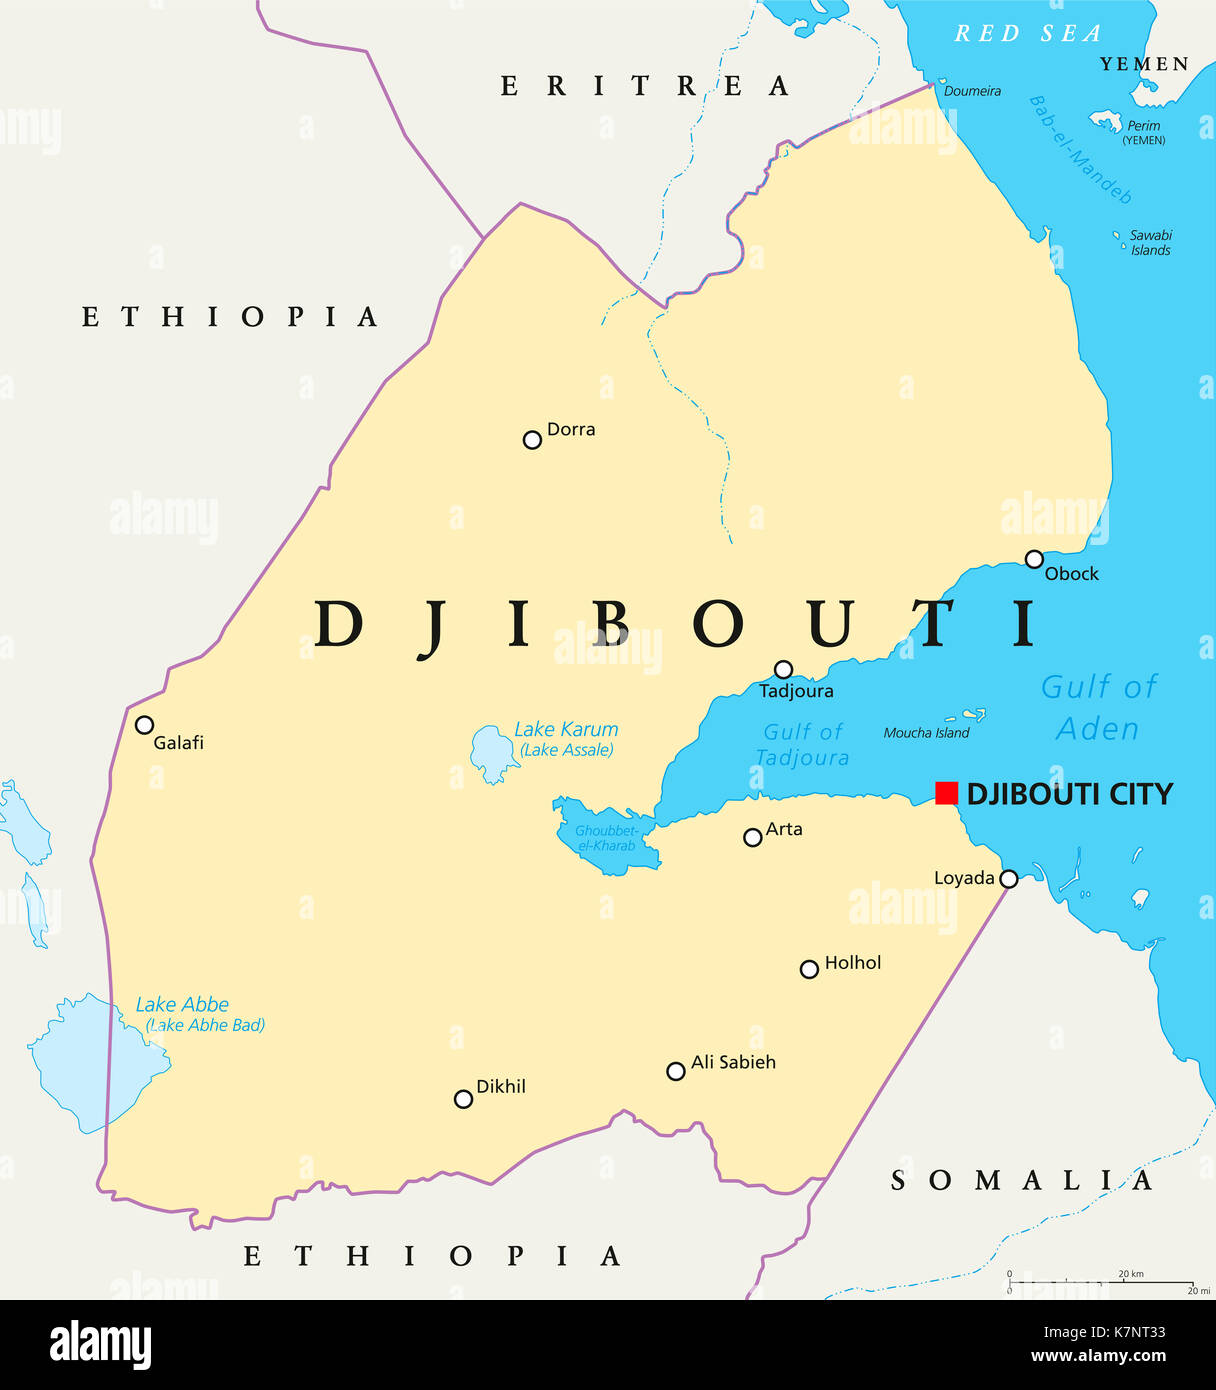 Djibouti political map with capital Djibouti City, borders and important cities. Republic and country in the Horn of Africa. Illustration Stock Photo